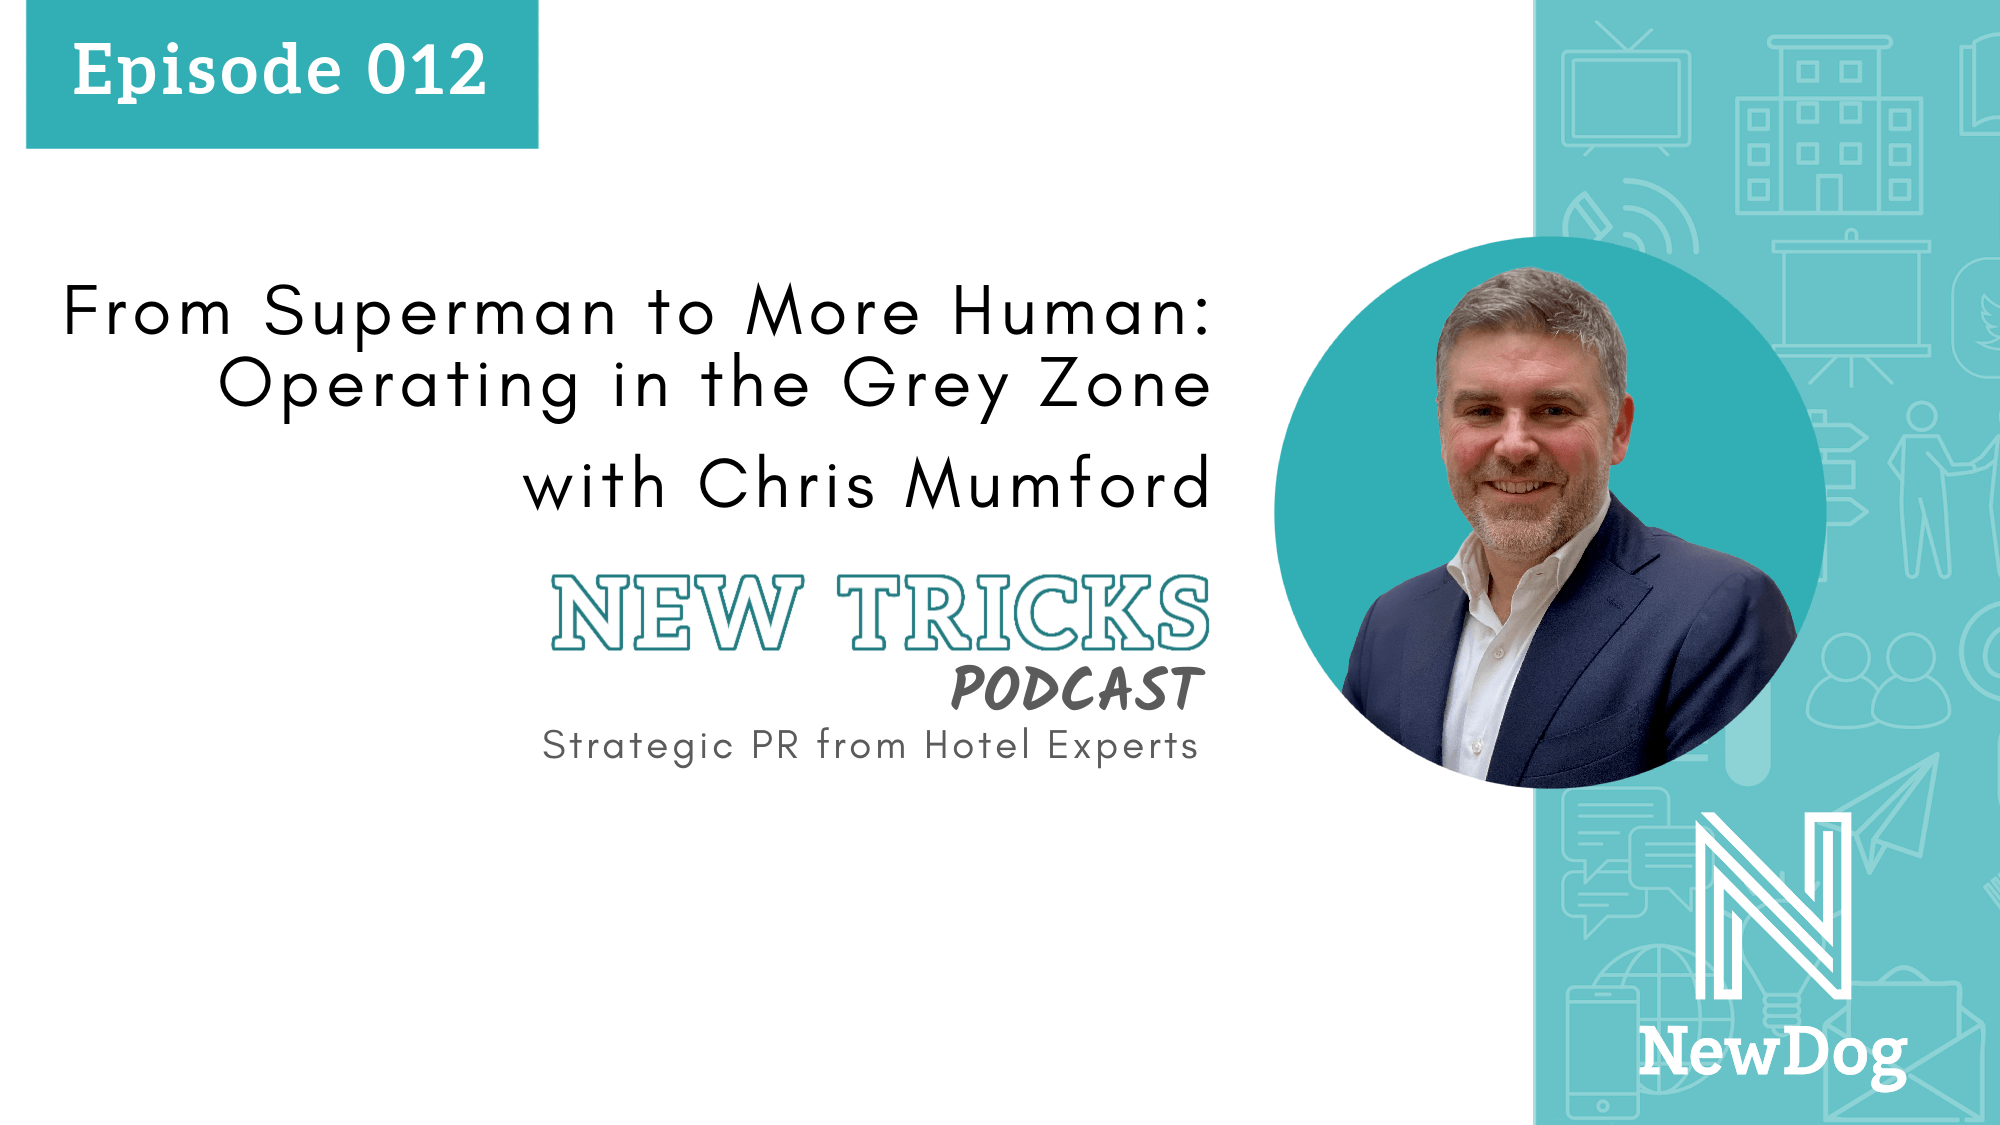 ep12-banner-From-Superman-to-More-Human-Operating-in-the-Grey-Zone-new-tricks-podcast